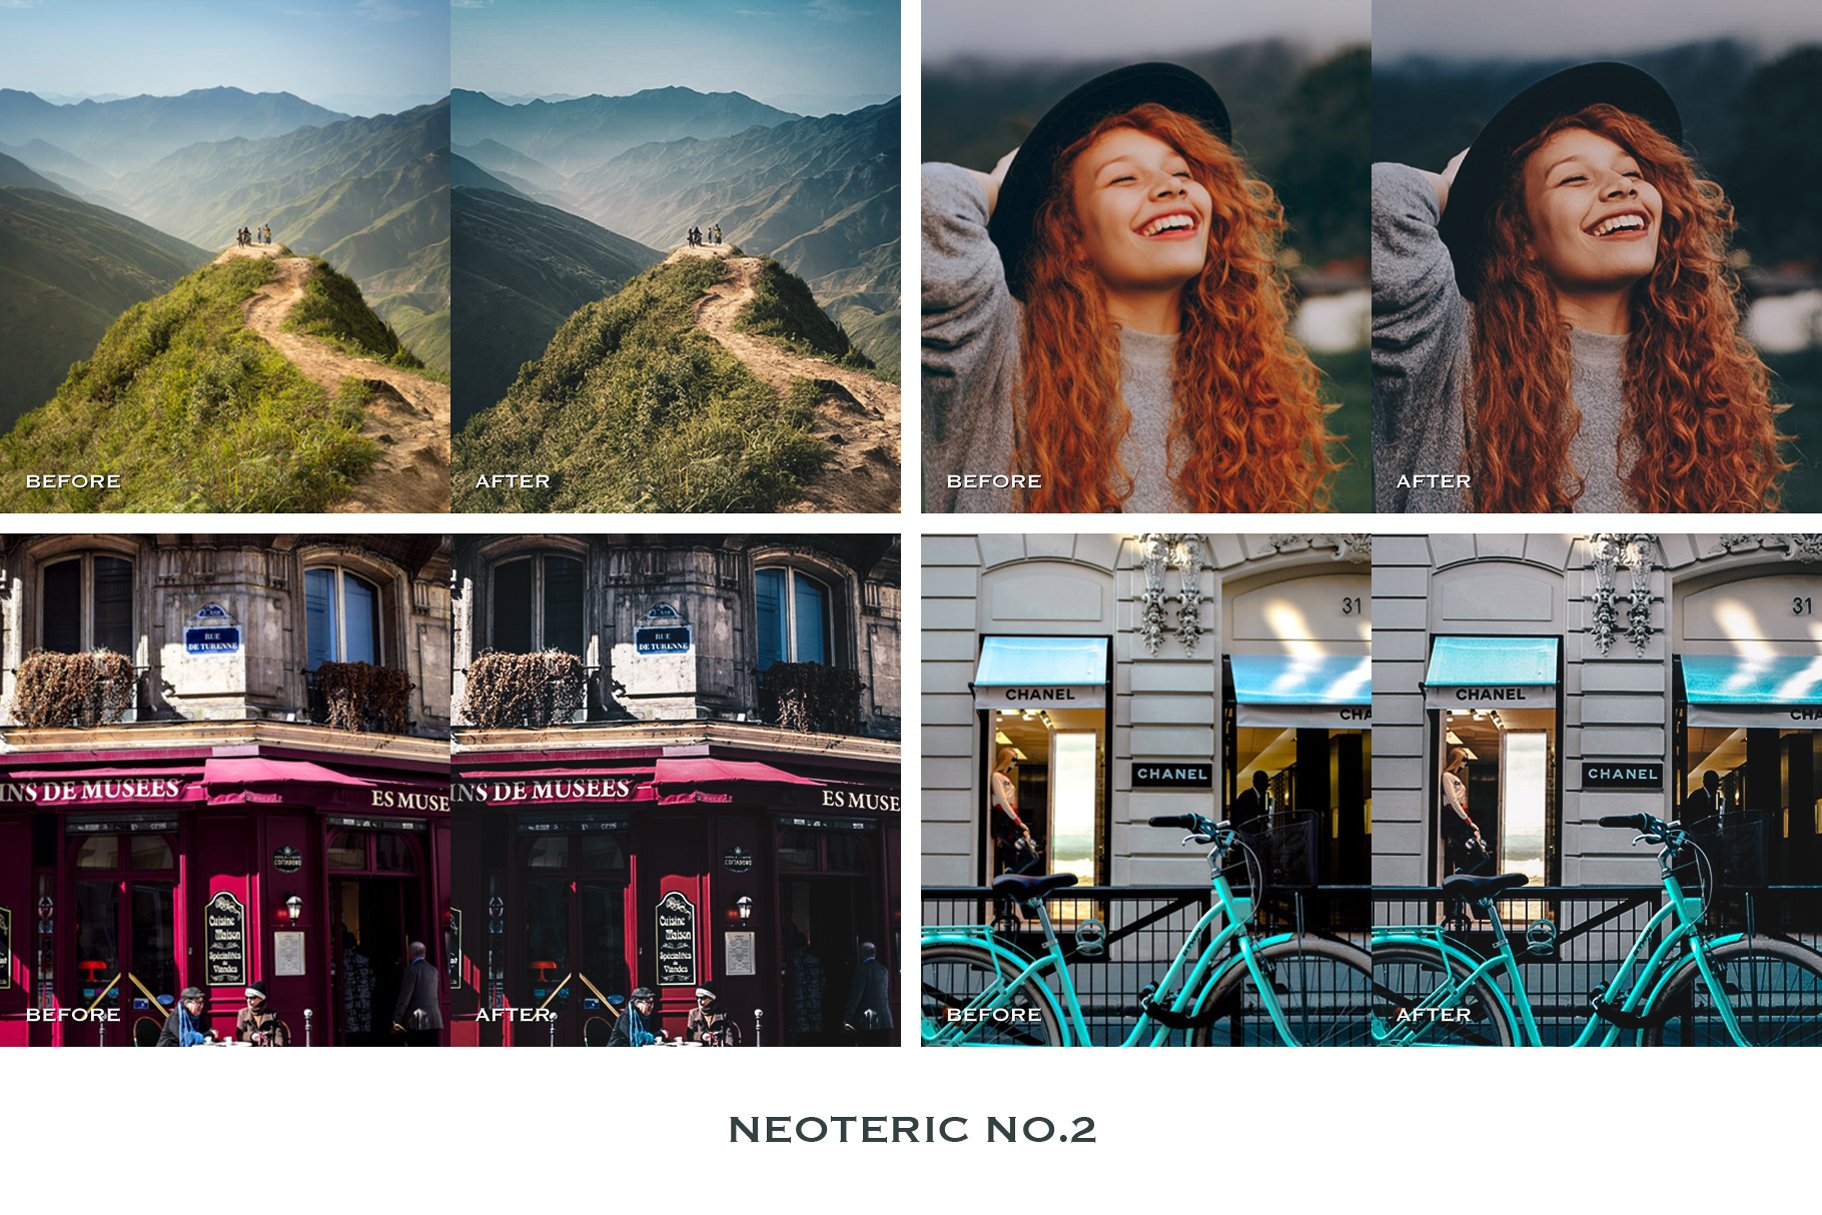 neoteric no.2 747